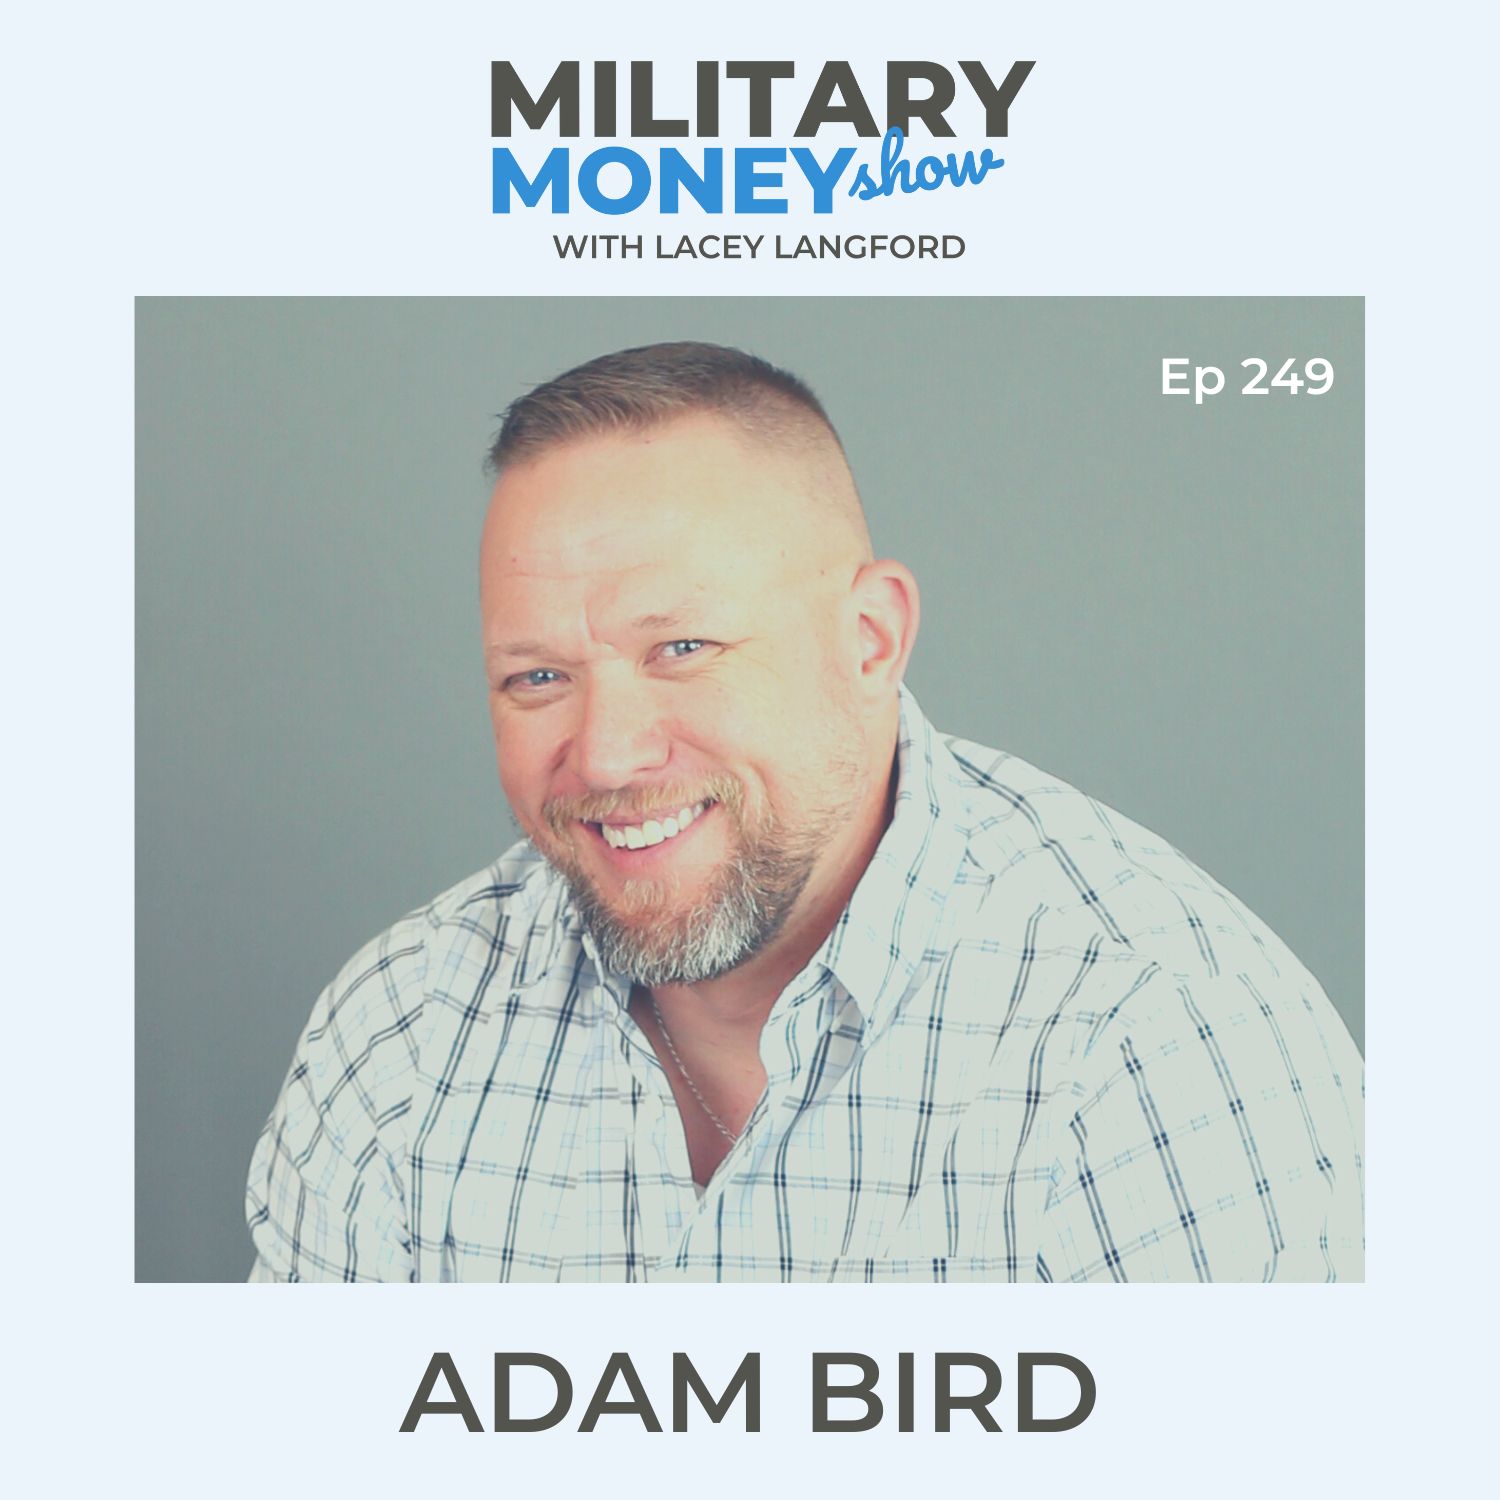 Army veteran and serial entrepreneur Adam Bird shares strategies to manage multiple businesses effectively.